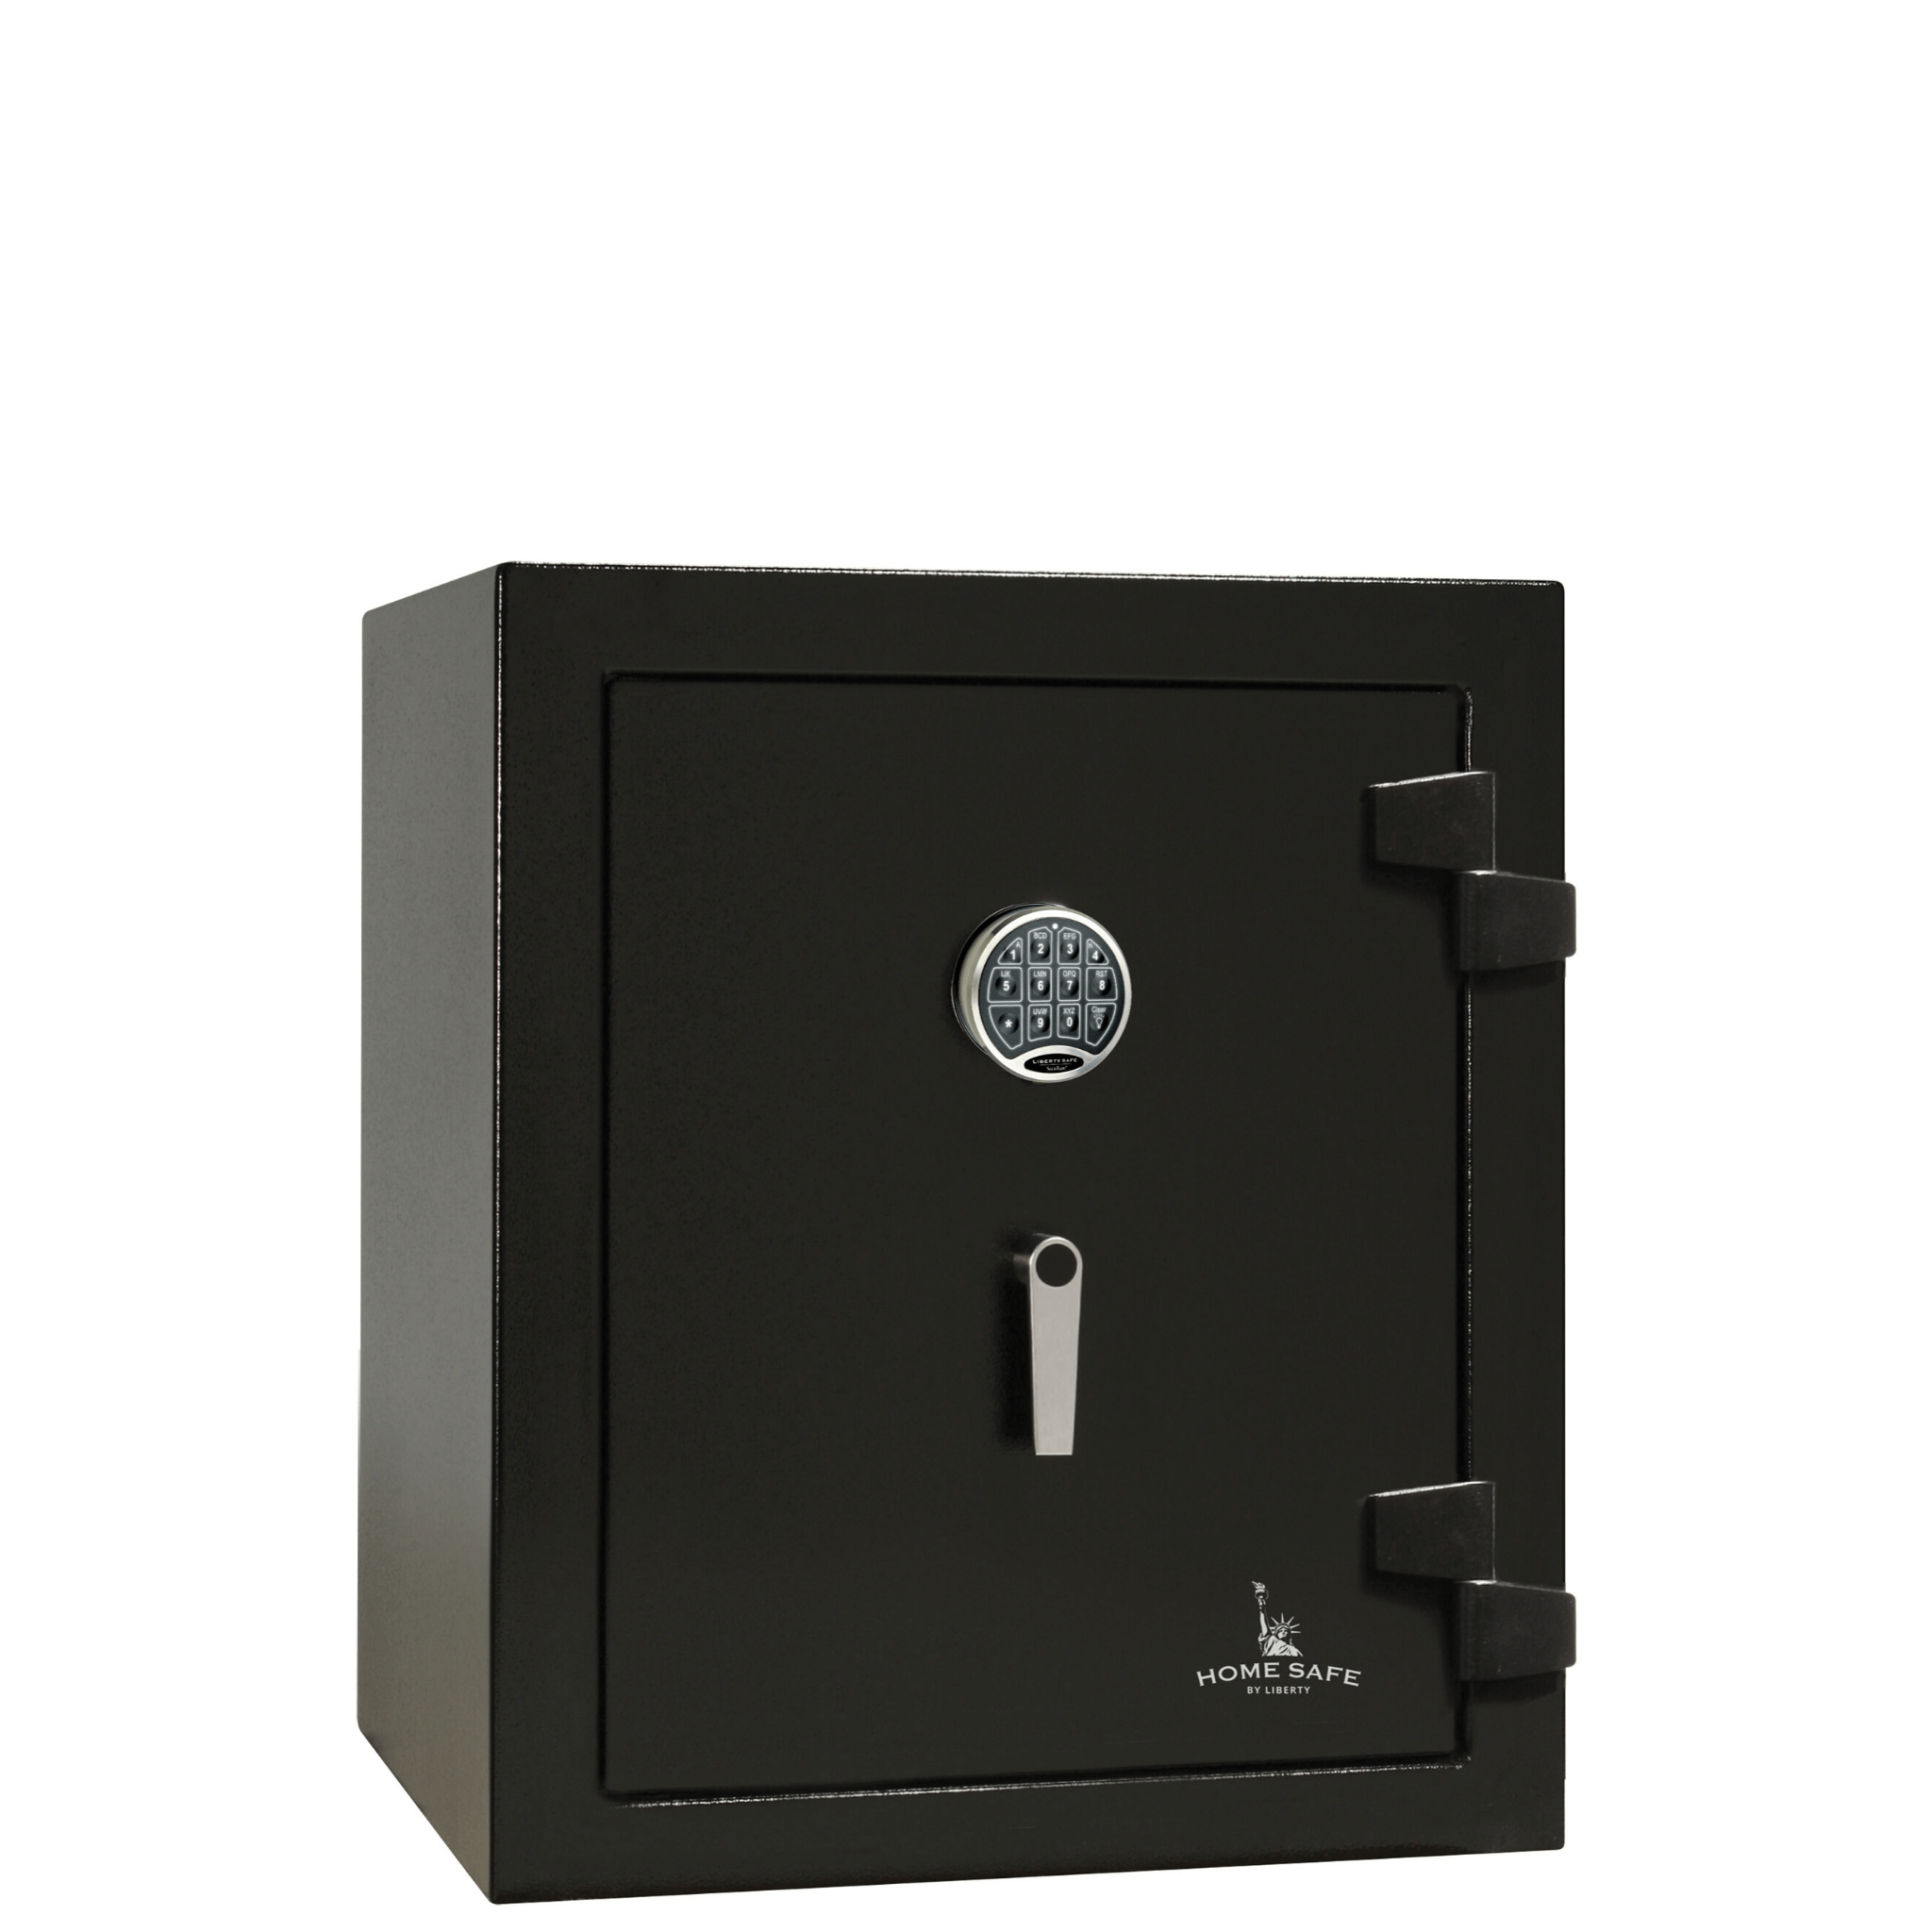 Home Safe | 08 | 60 Minute Fire Protection | Black | Electronic Lock | Dimensions: 30"(H) x 24.25"(W) x 22"(D), photo 1